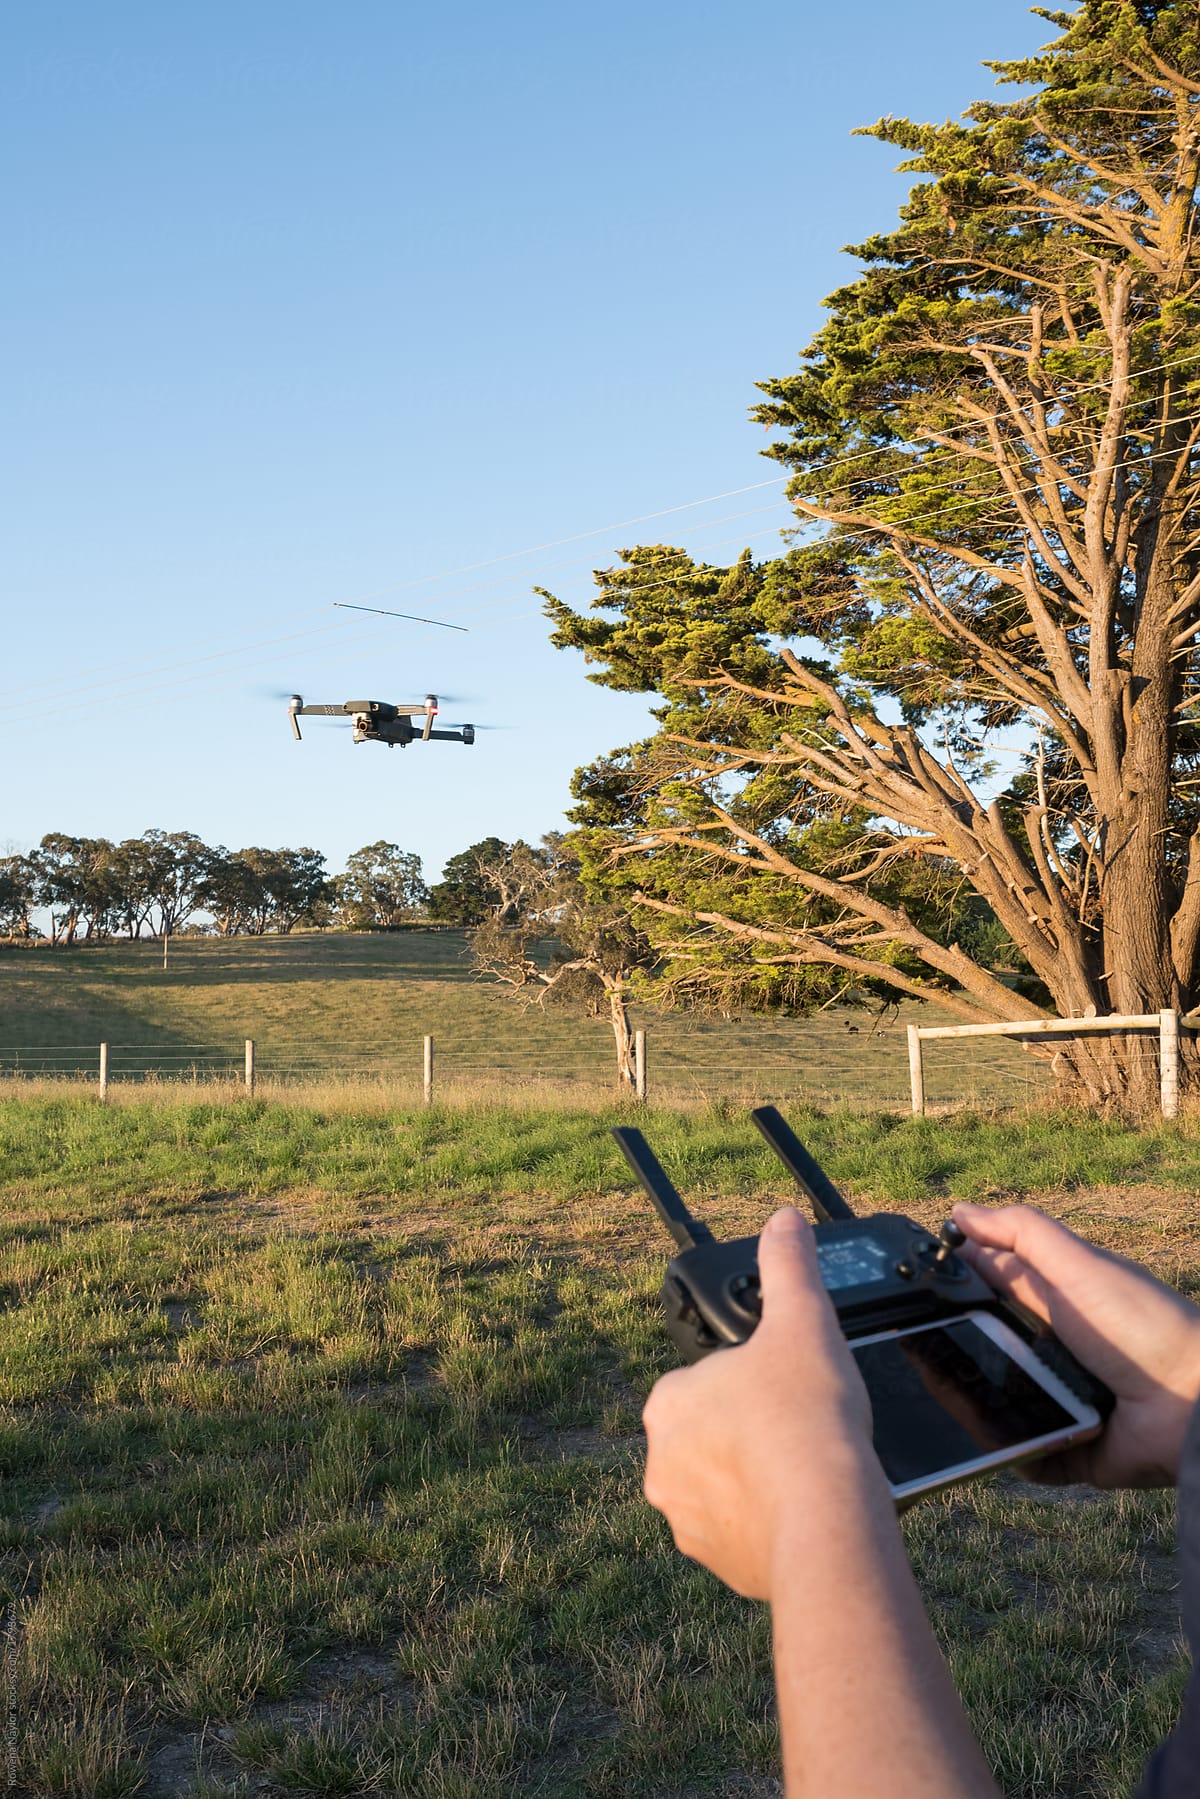 Perosn operating a drone in a rural setting